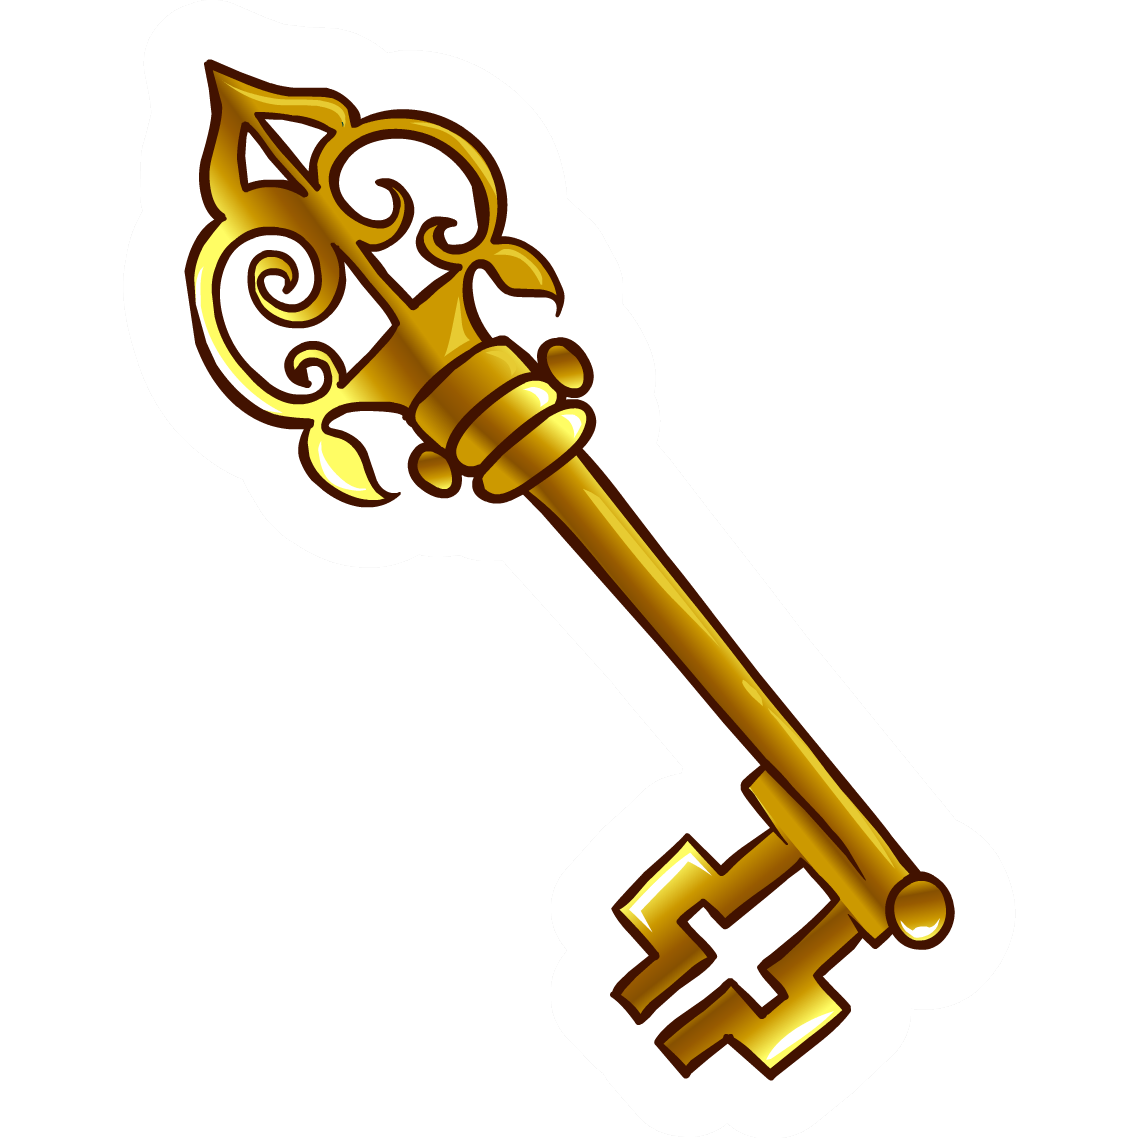 Skeleton Key Pictures - ClipArt Best